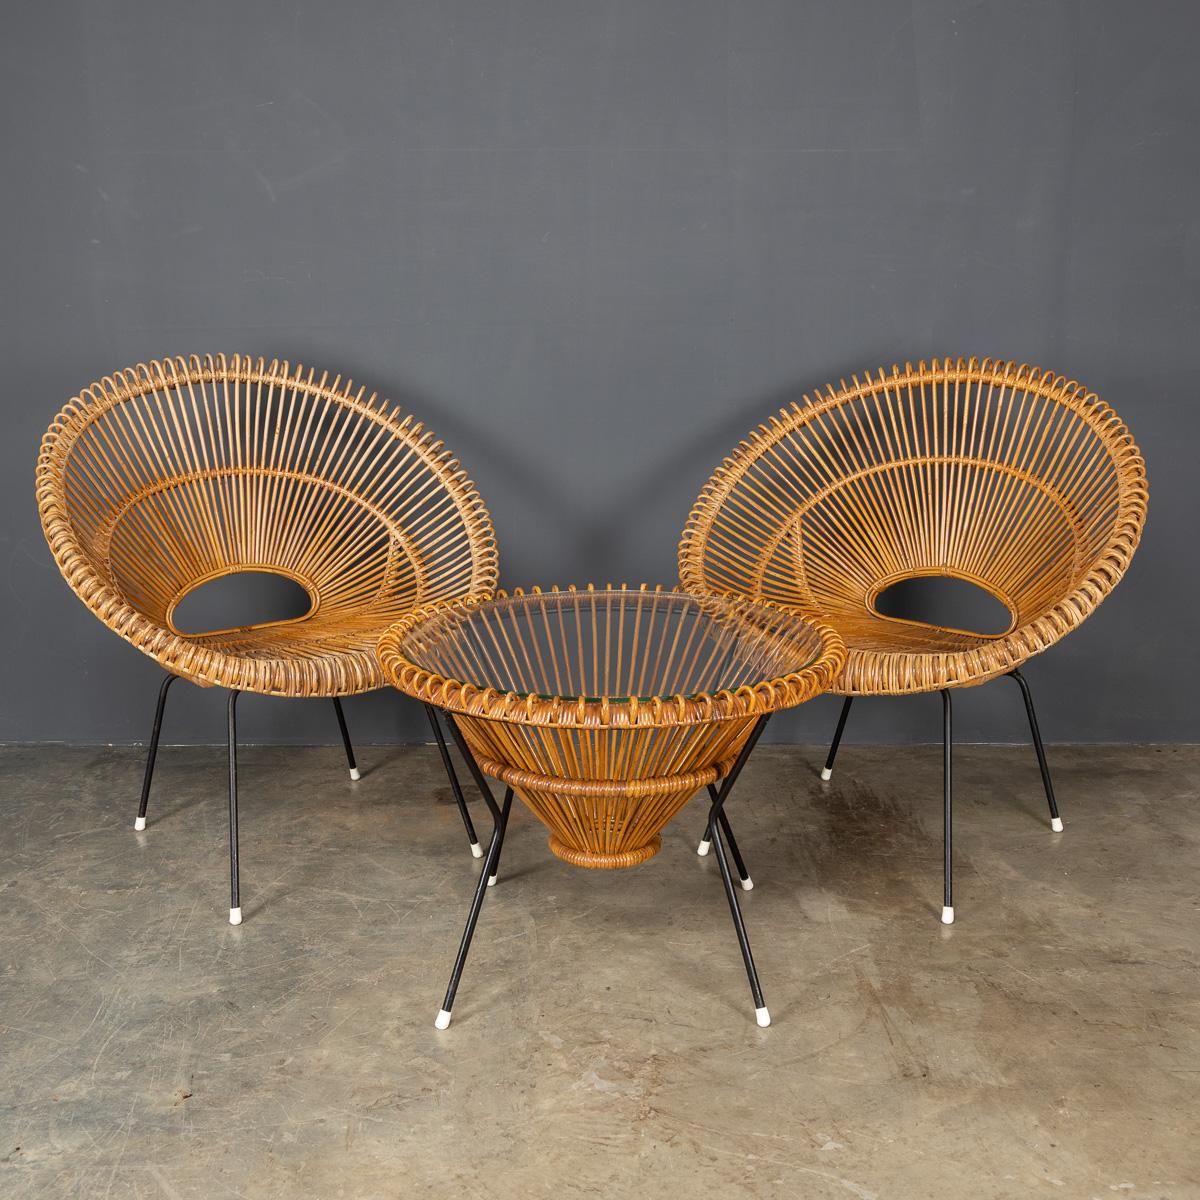 Stylish 20th Century rattan table and chairs by Janine Abraham and Dirk Jan Rol, made in the 1960's, with metal frames, rattan and glass topped table.

CONDITION
In Great Condition - wear as expected.

SIZE
TABLE
Diameter: 59cm
Height: